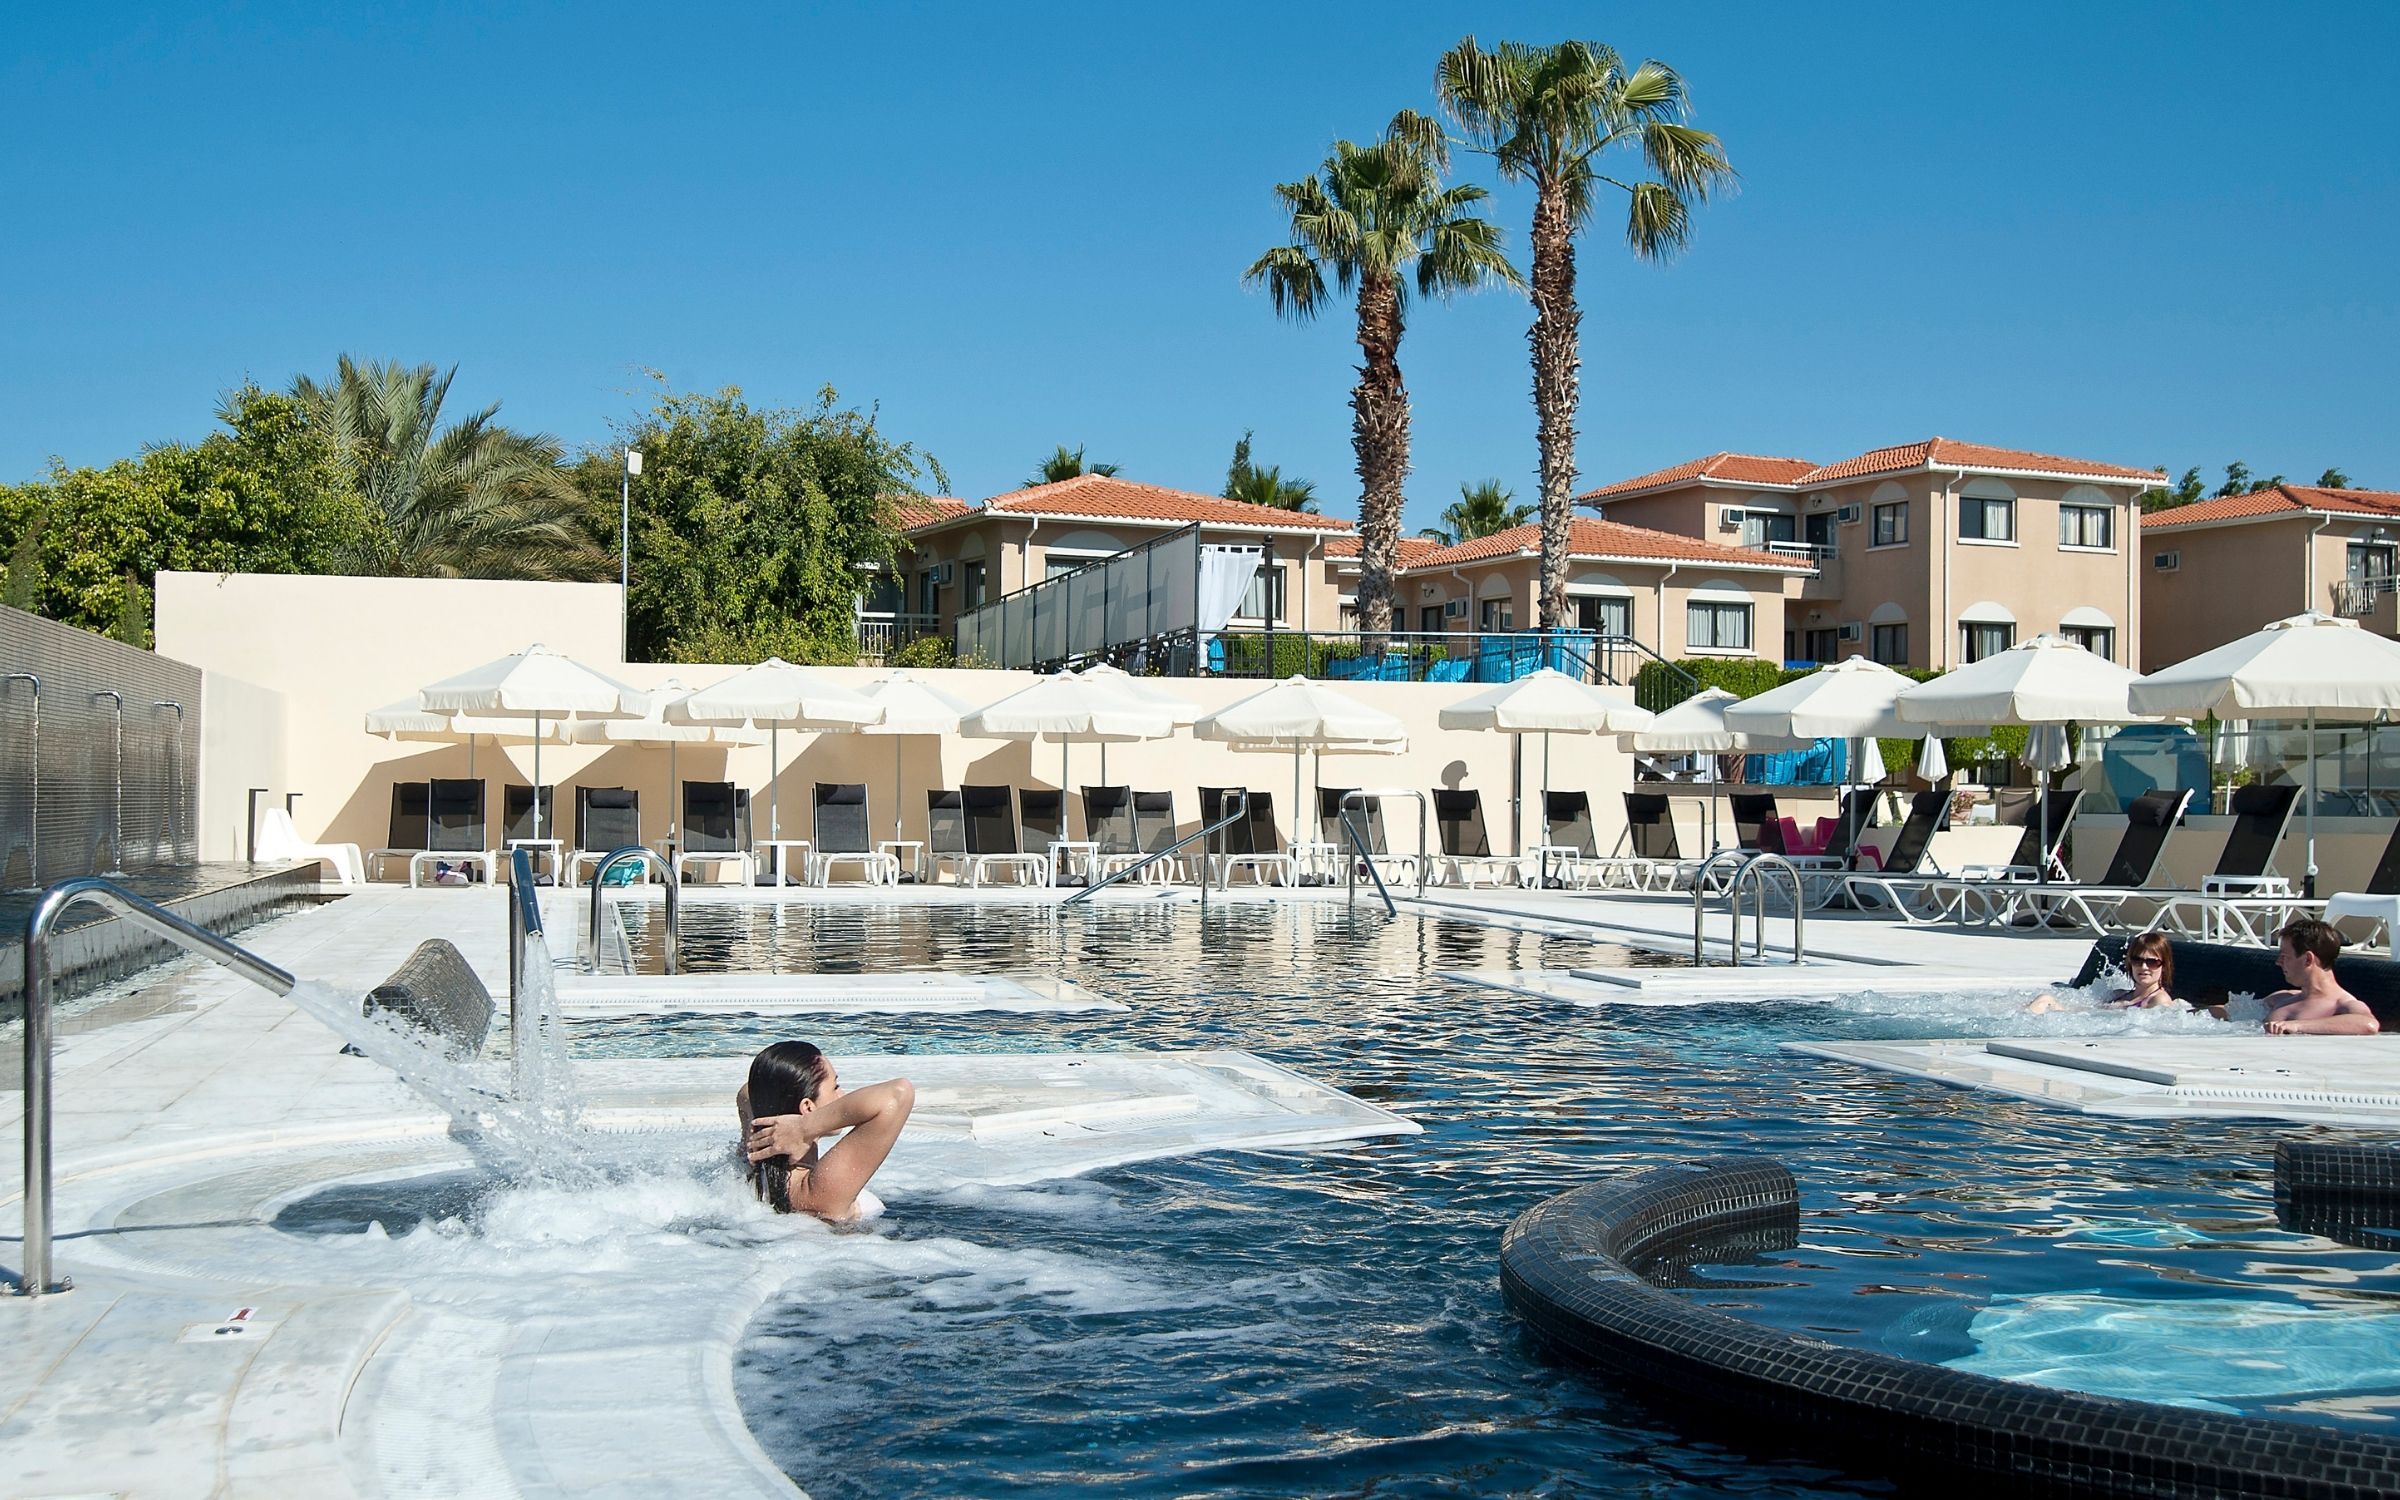 The King Jason Paphos – Designed for Adults in Cyprus